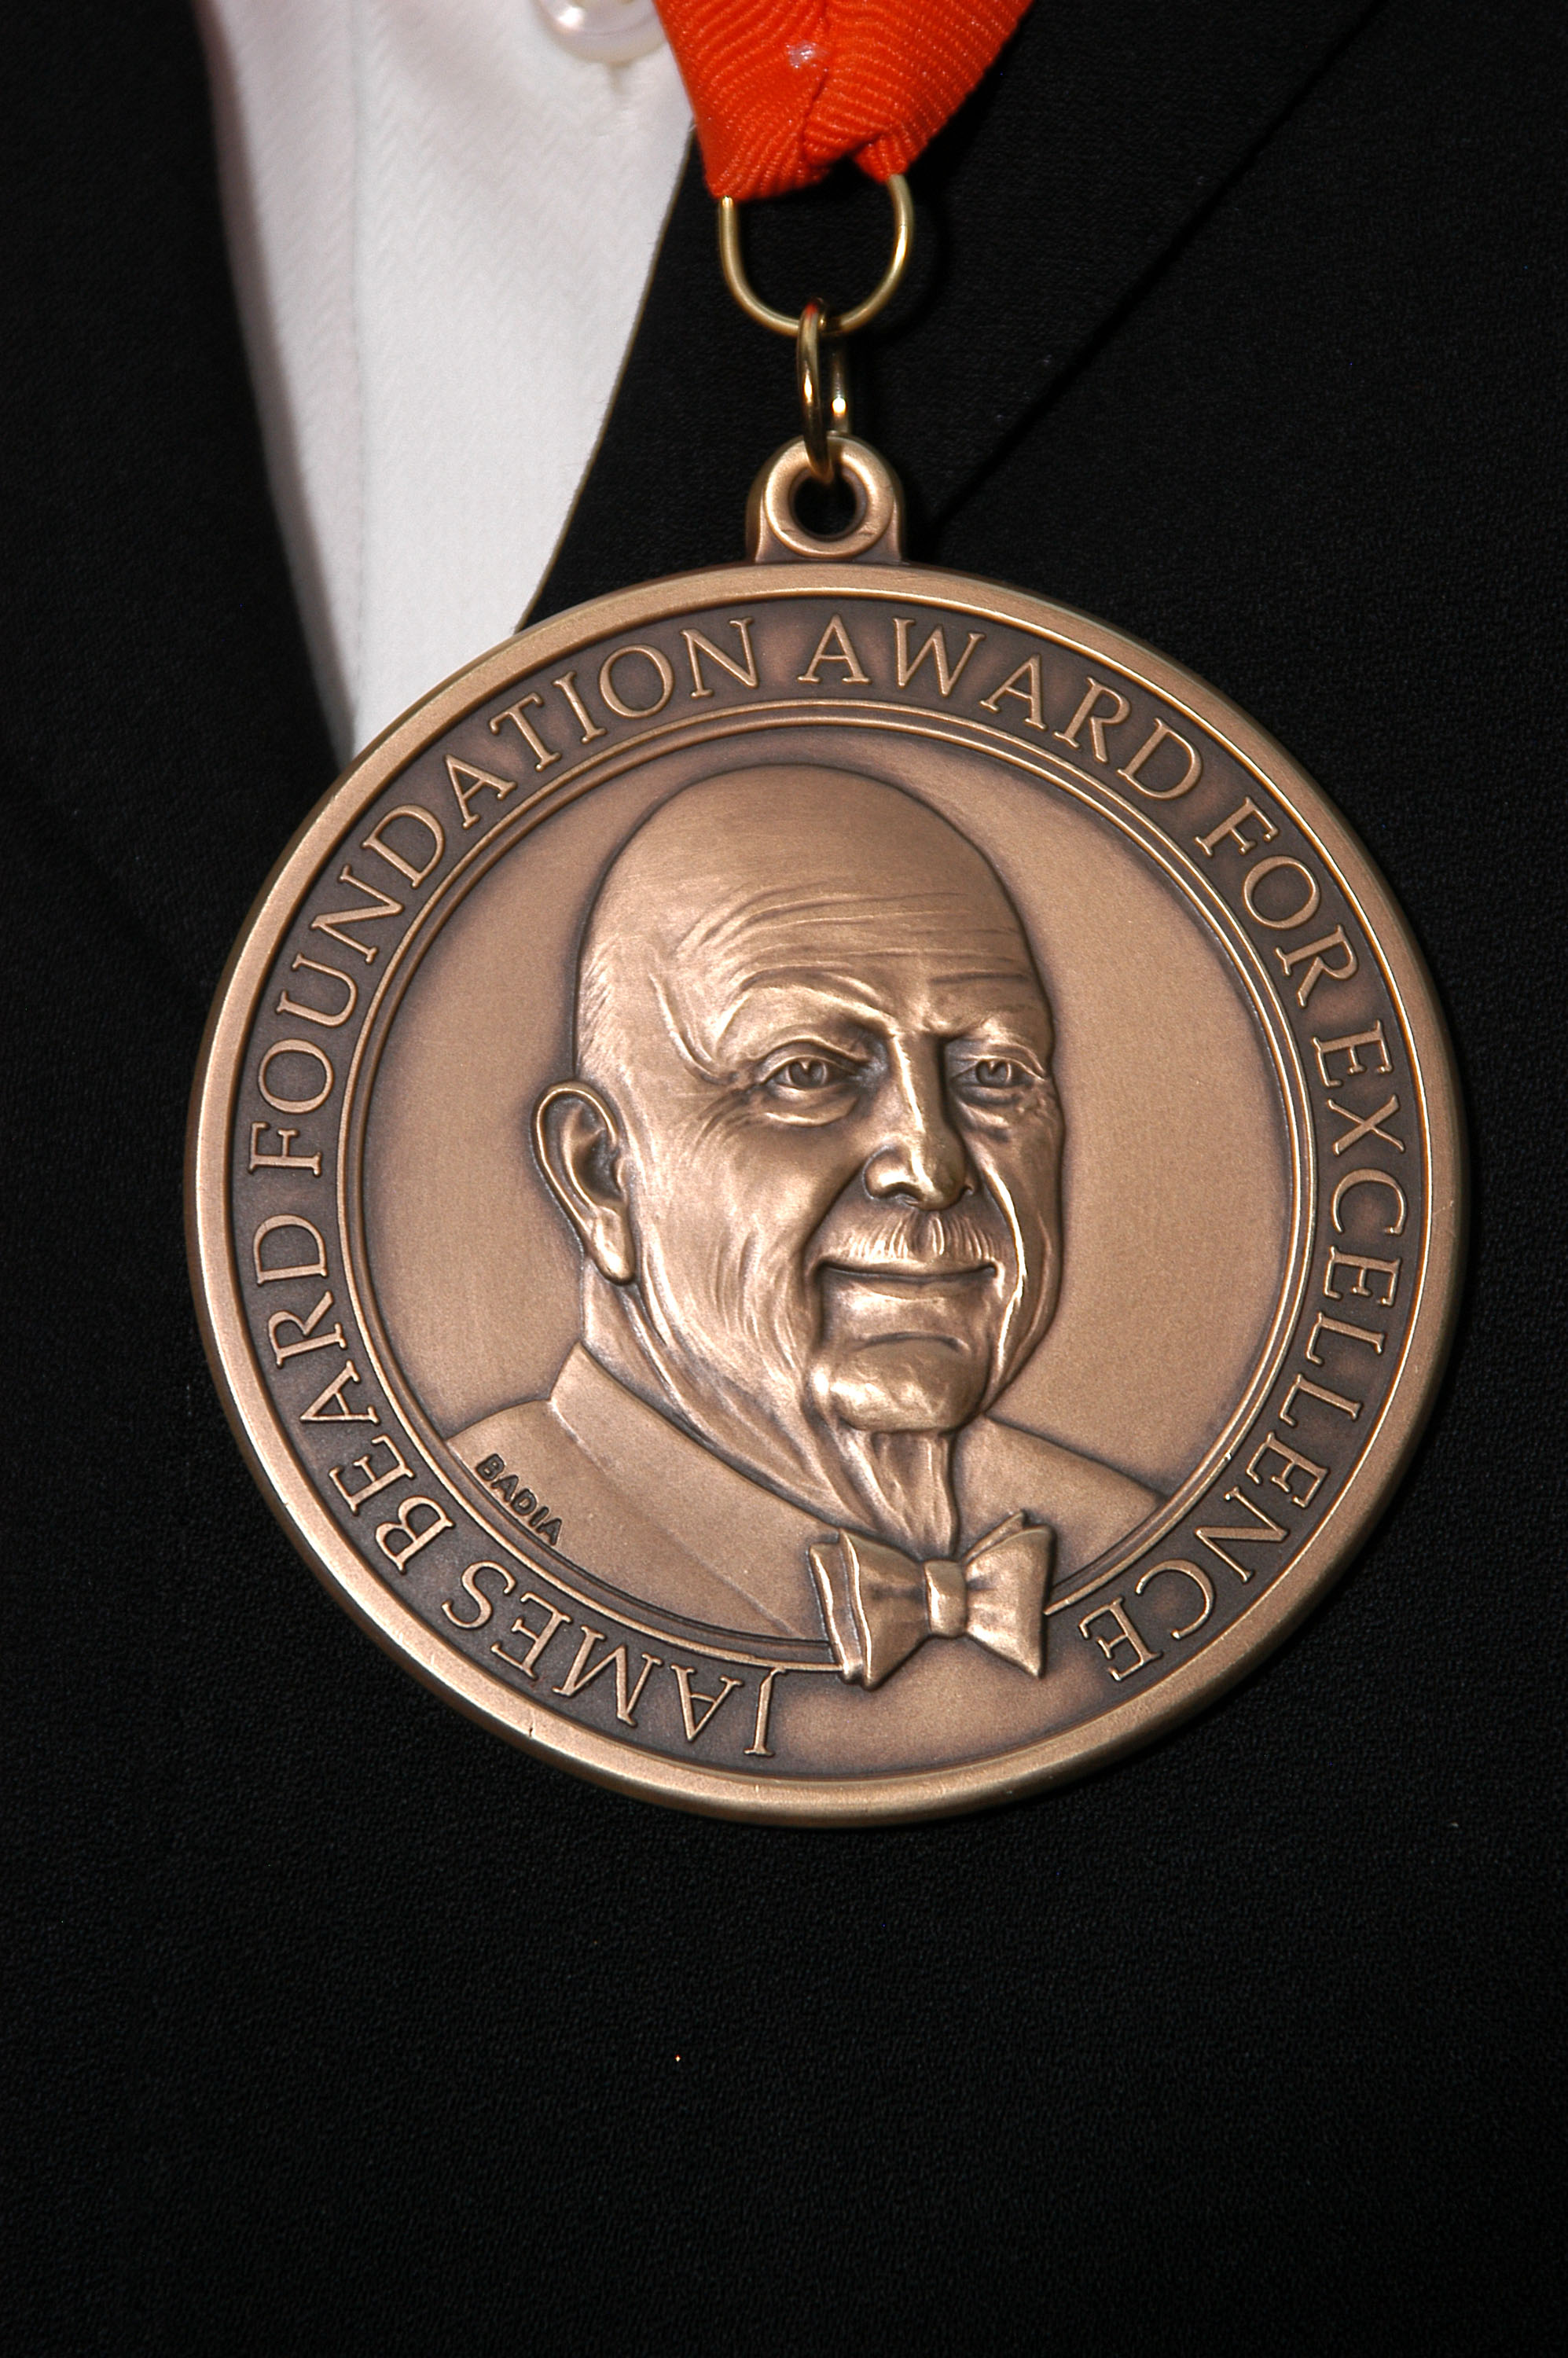 The James Beard award medal, cast in bronze, with the likeness of James Beard surrounded with the words “James Beard Foundation Award for Excellence” against a black background. 